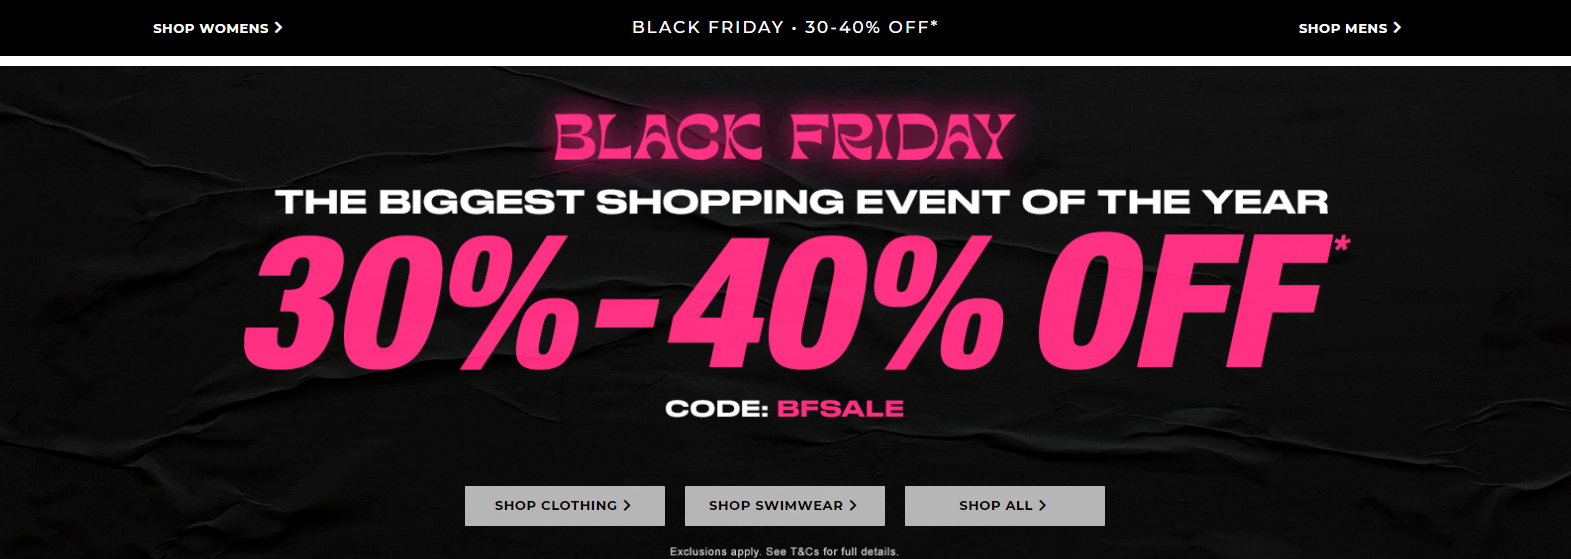 Sufstitch Black Friday extra 30-40% OFF with coupon on clothing, swimwear & more